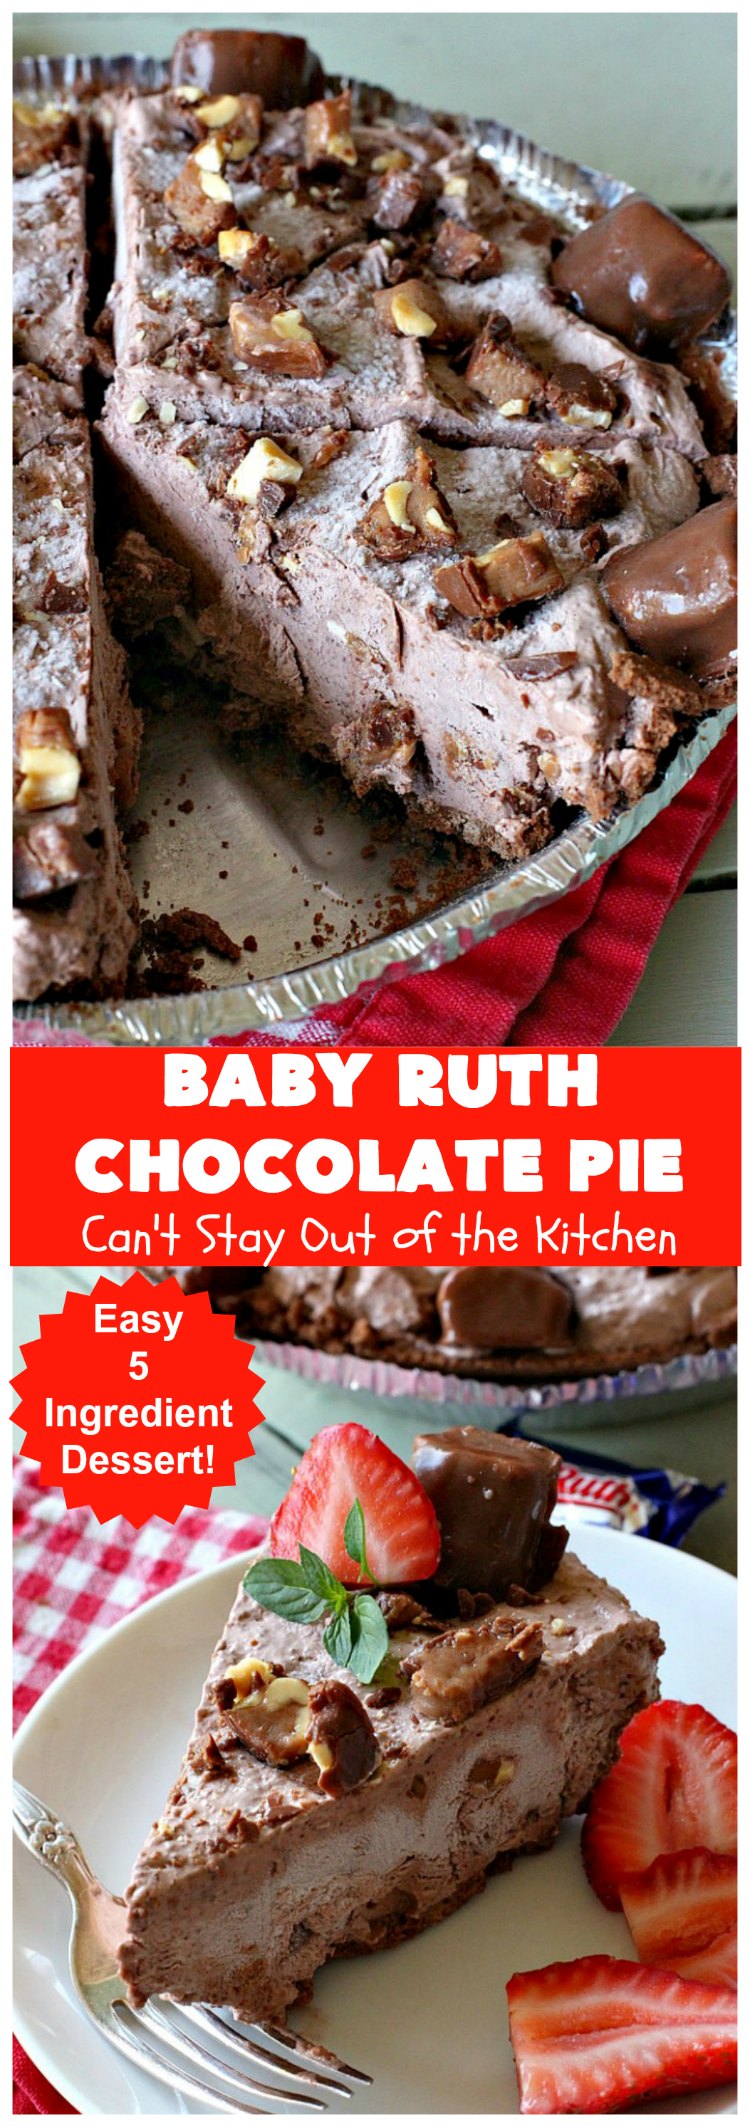 Baby Ruth Chocolate Pie - Can't Stay Out of the Kitchen